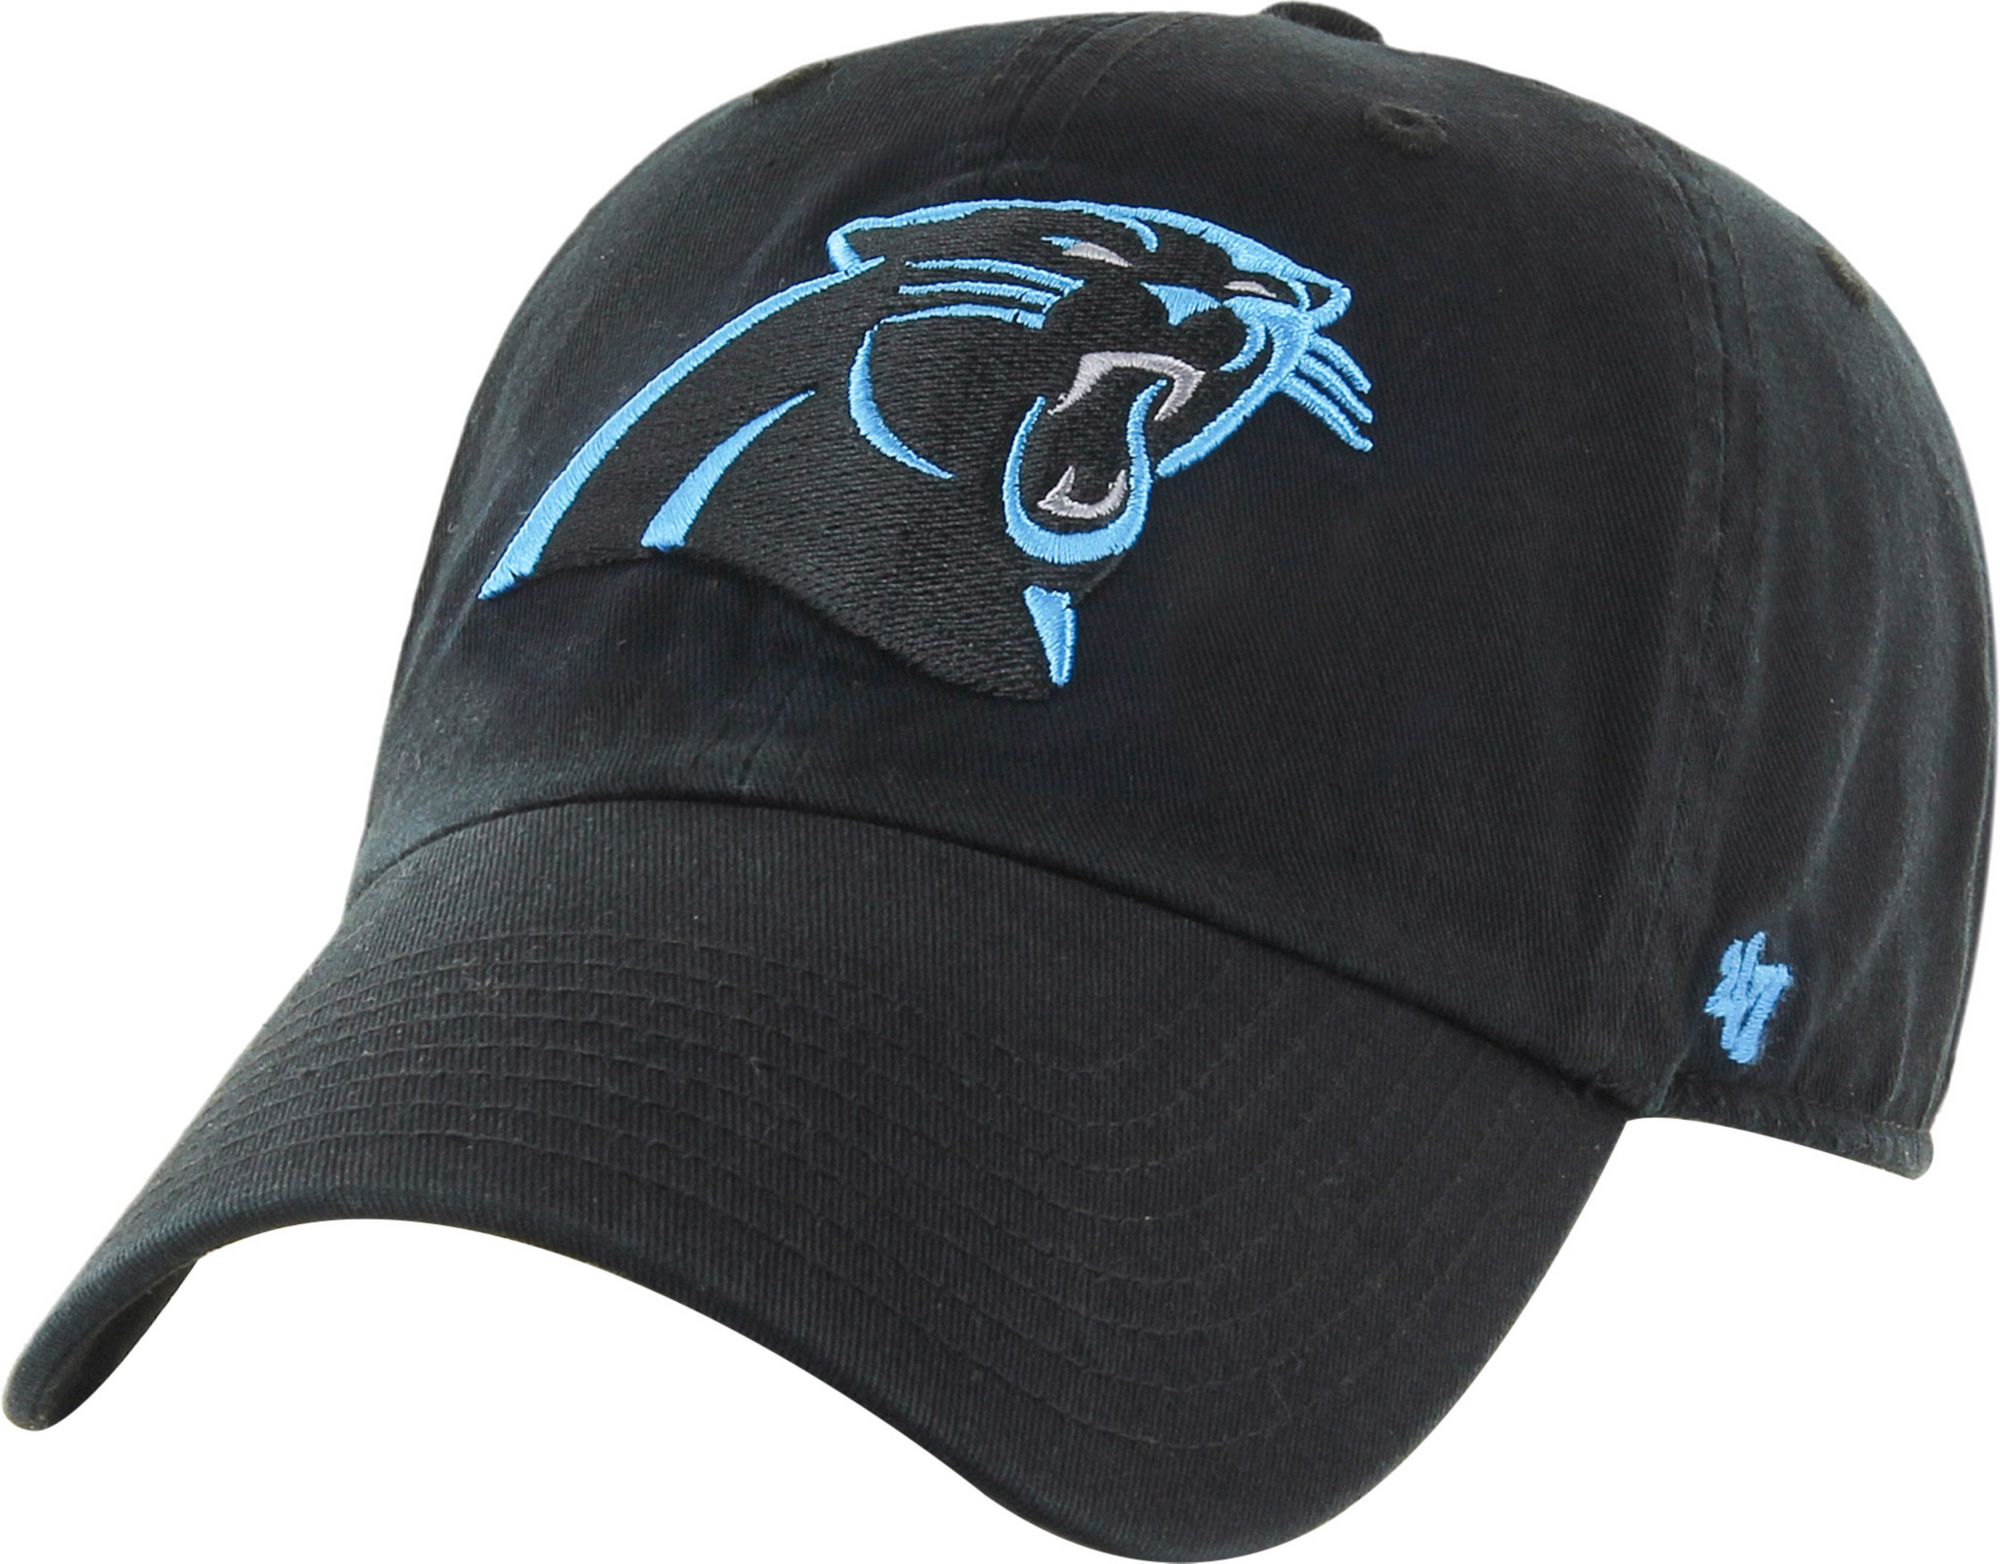 panthers hat